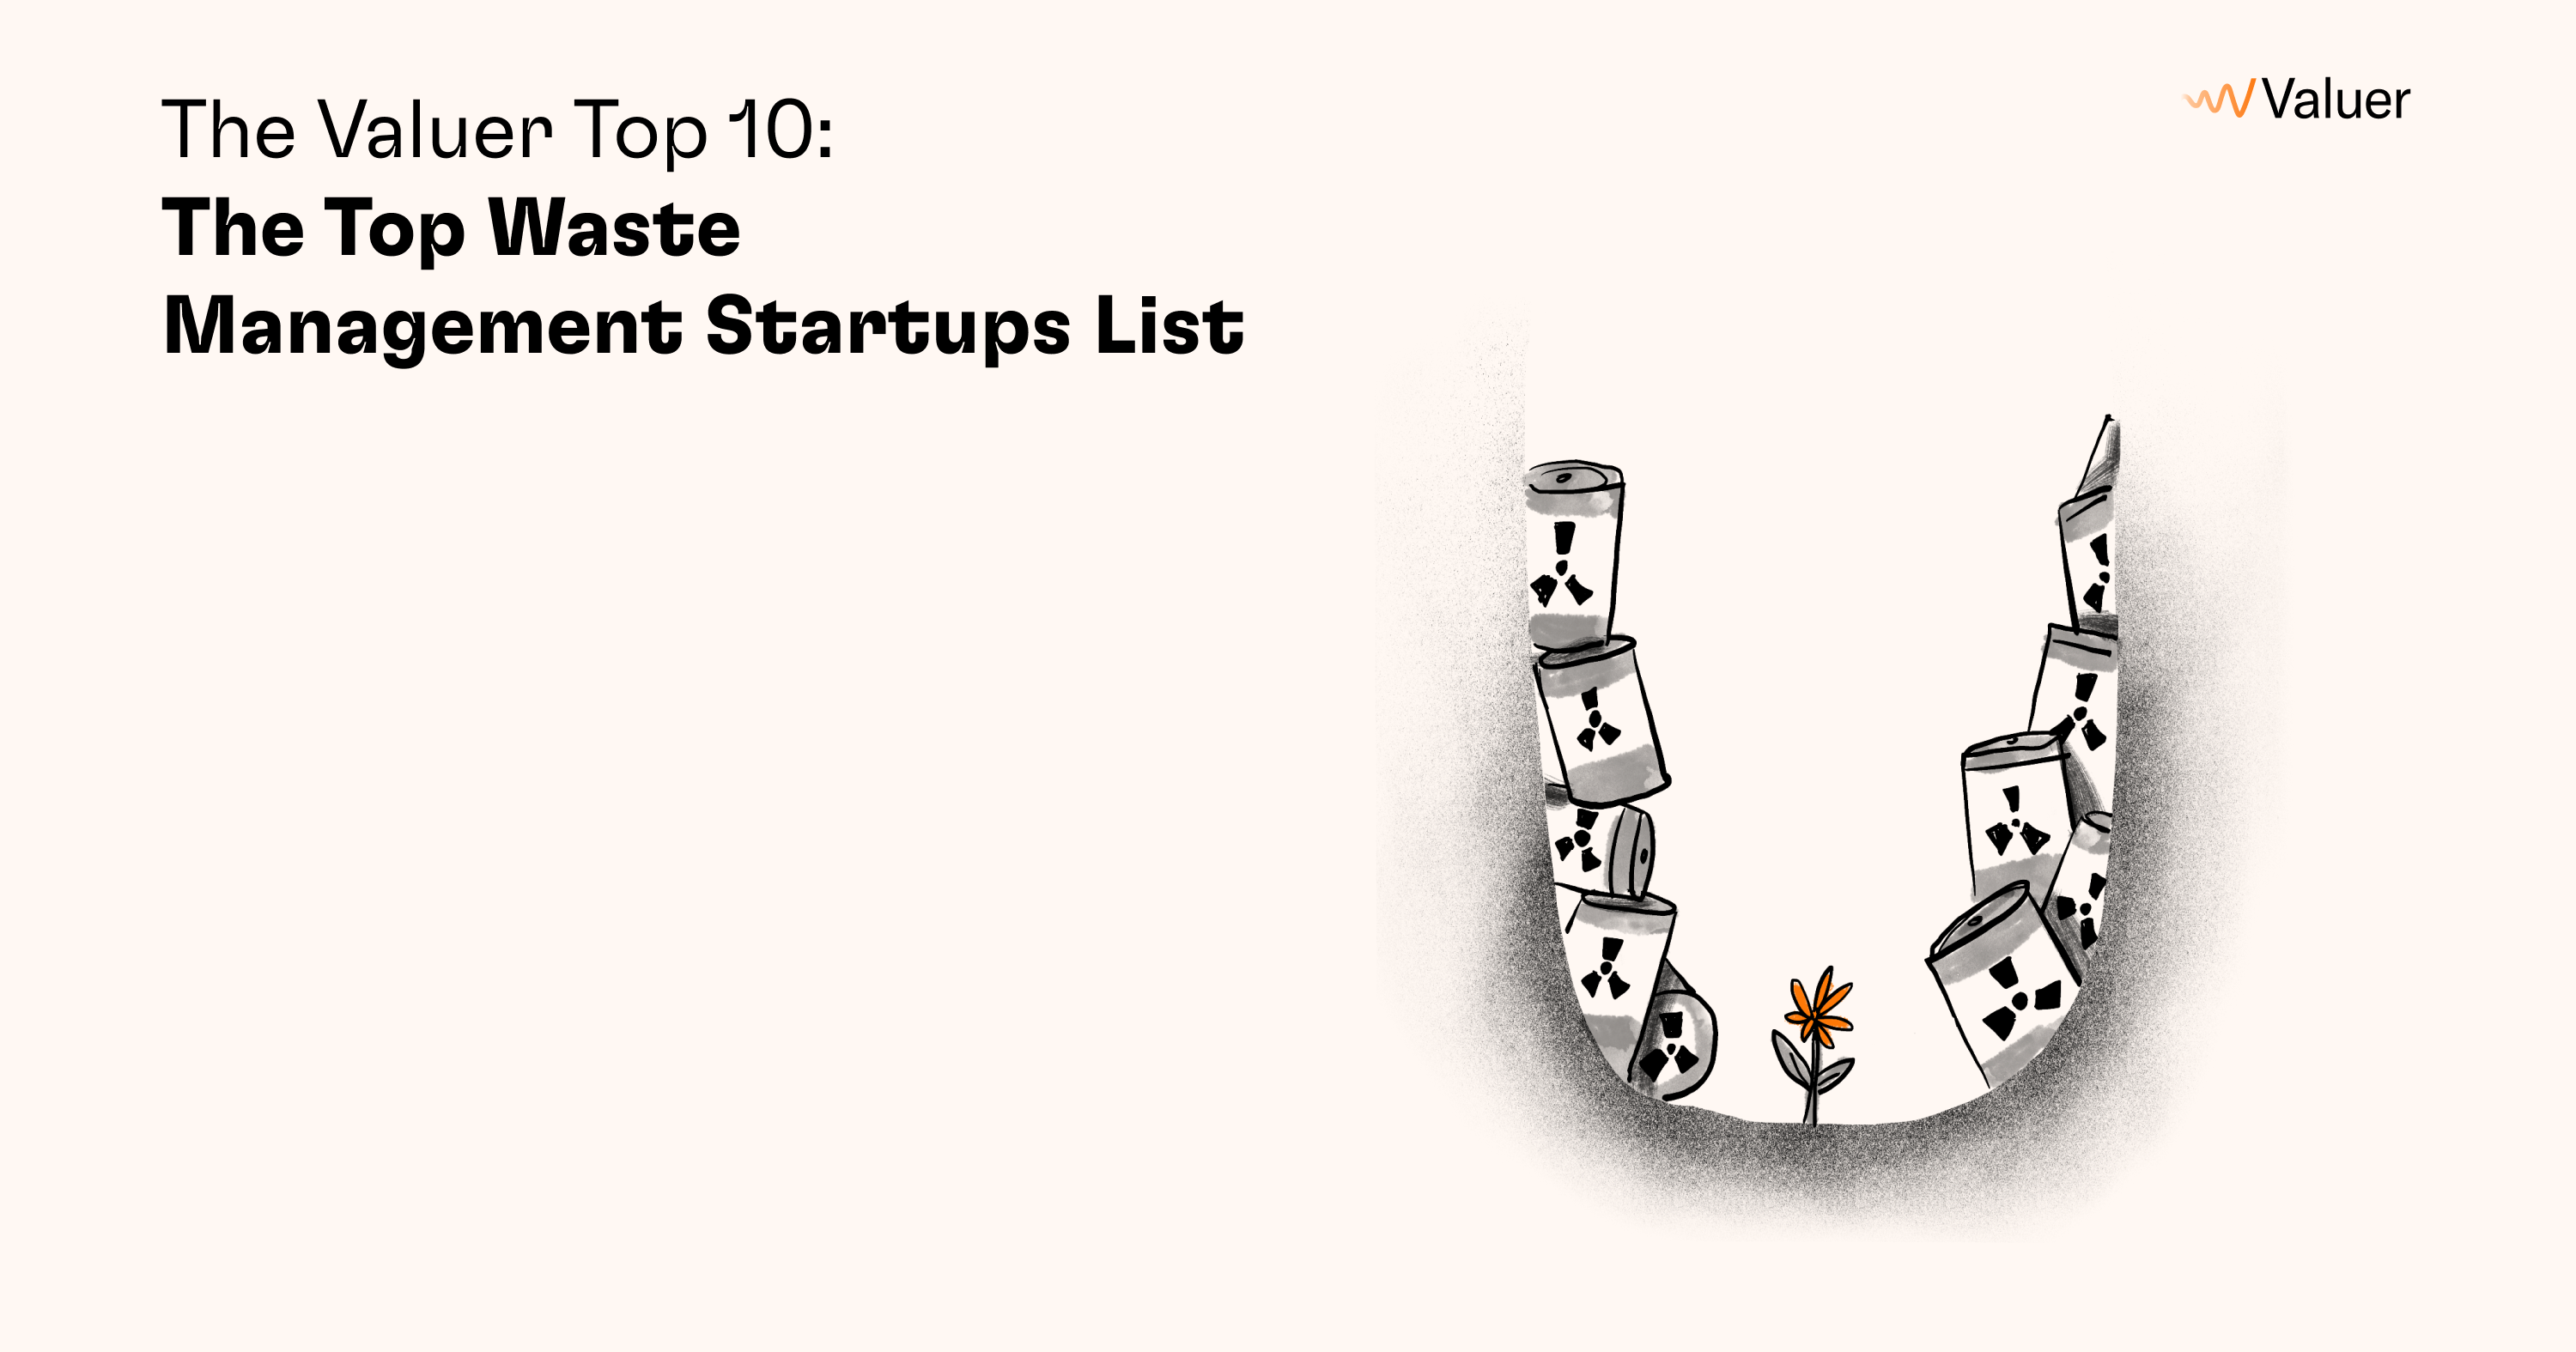 The Valuer Top 10: The Top Waste Management Startups List